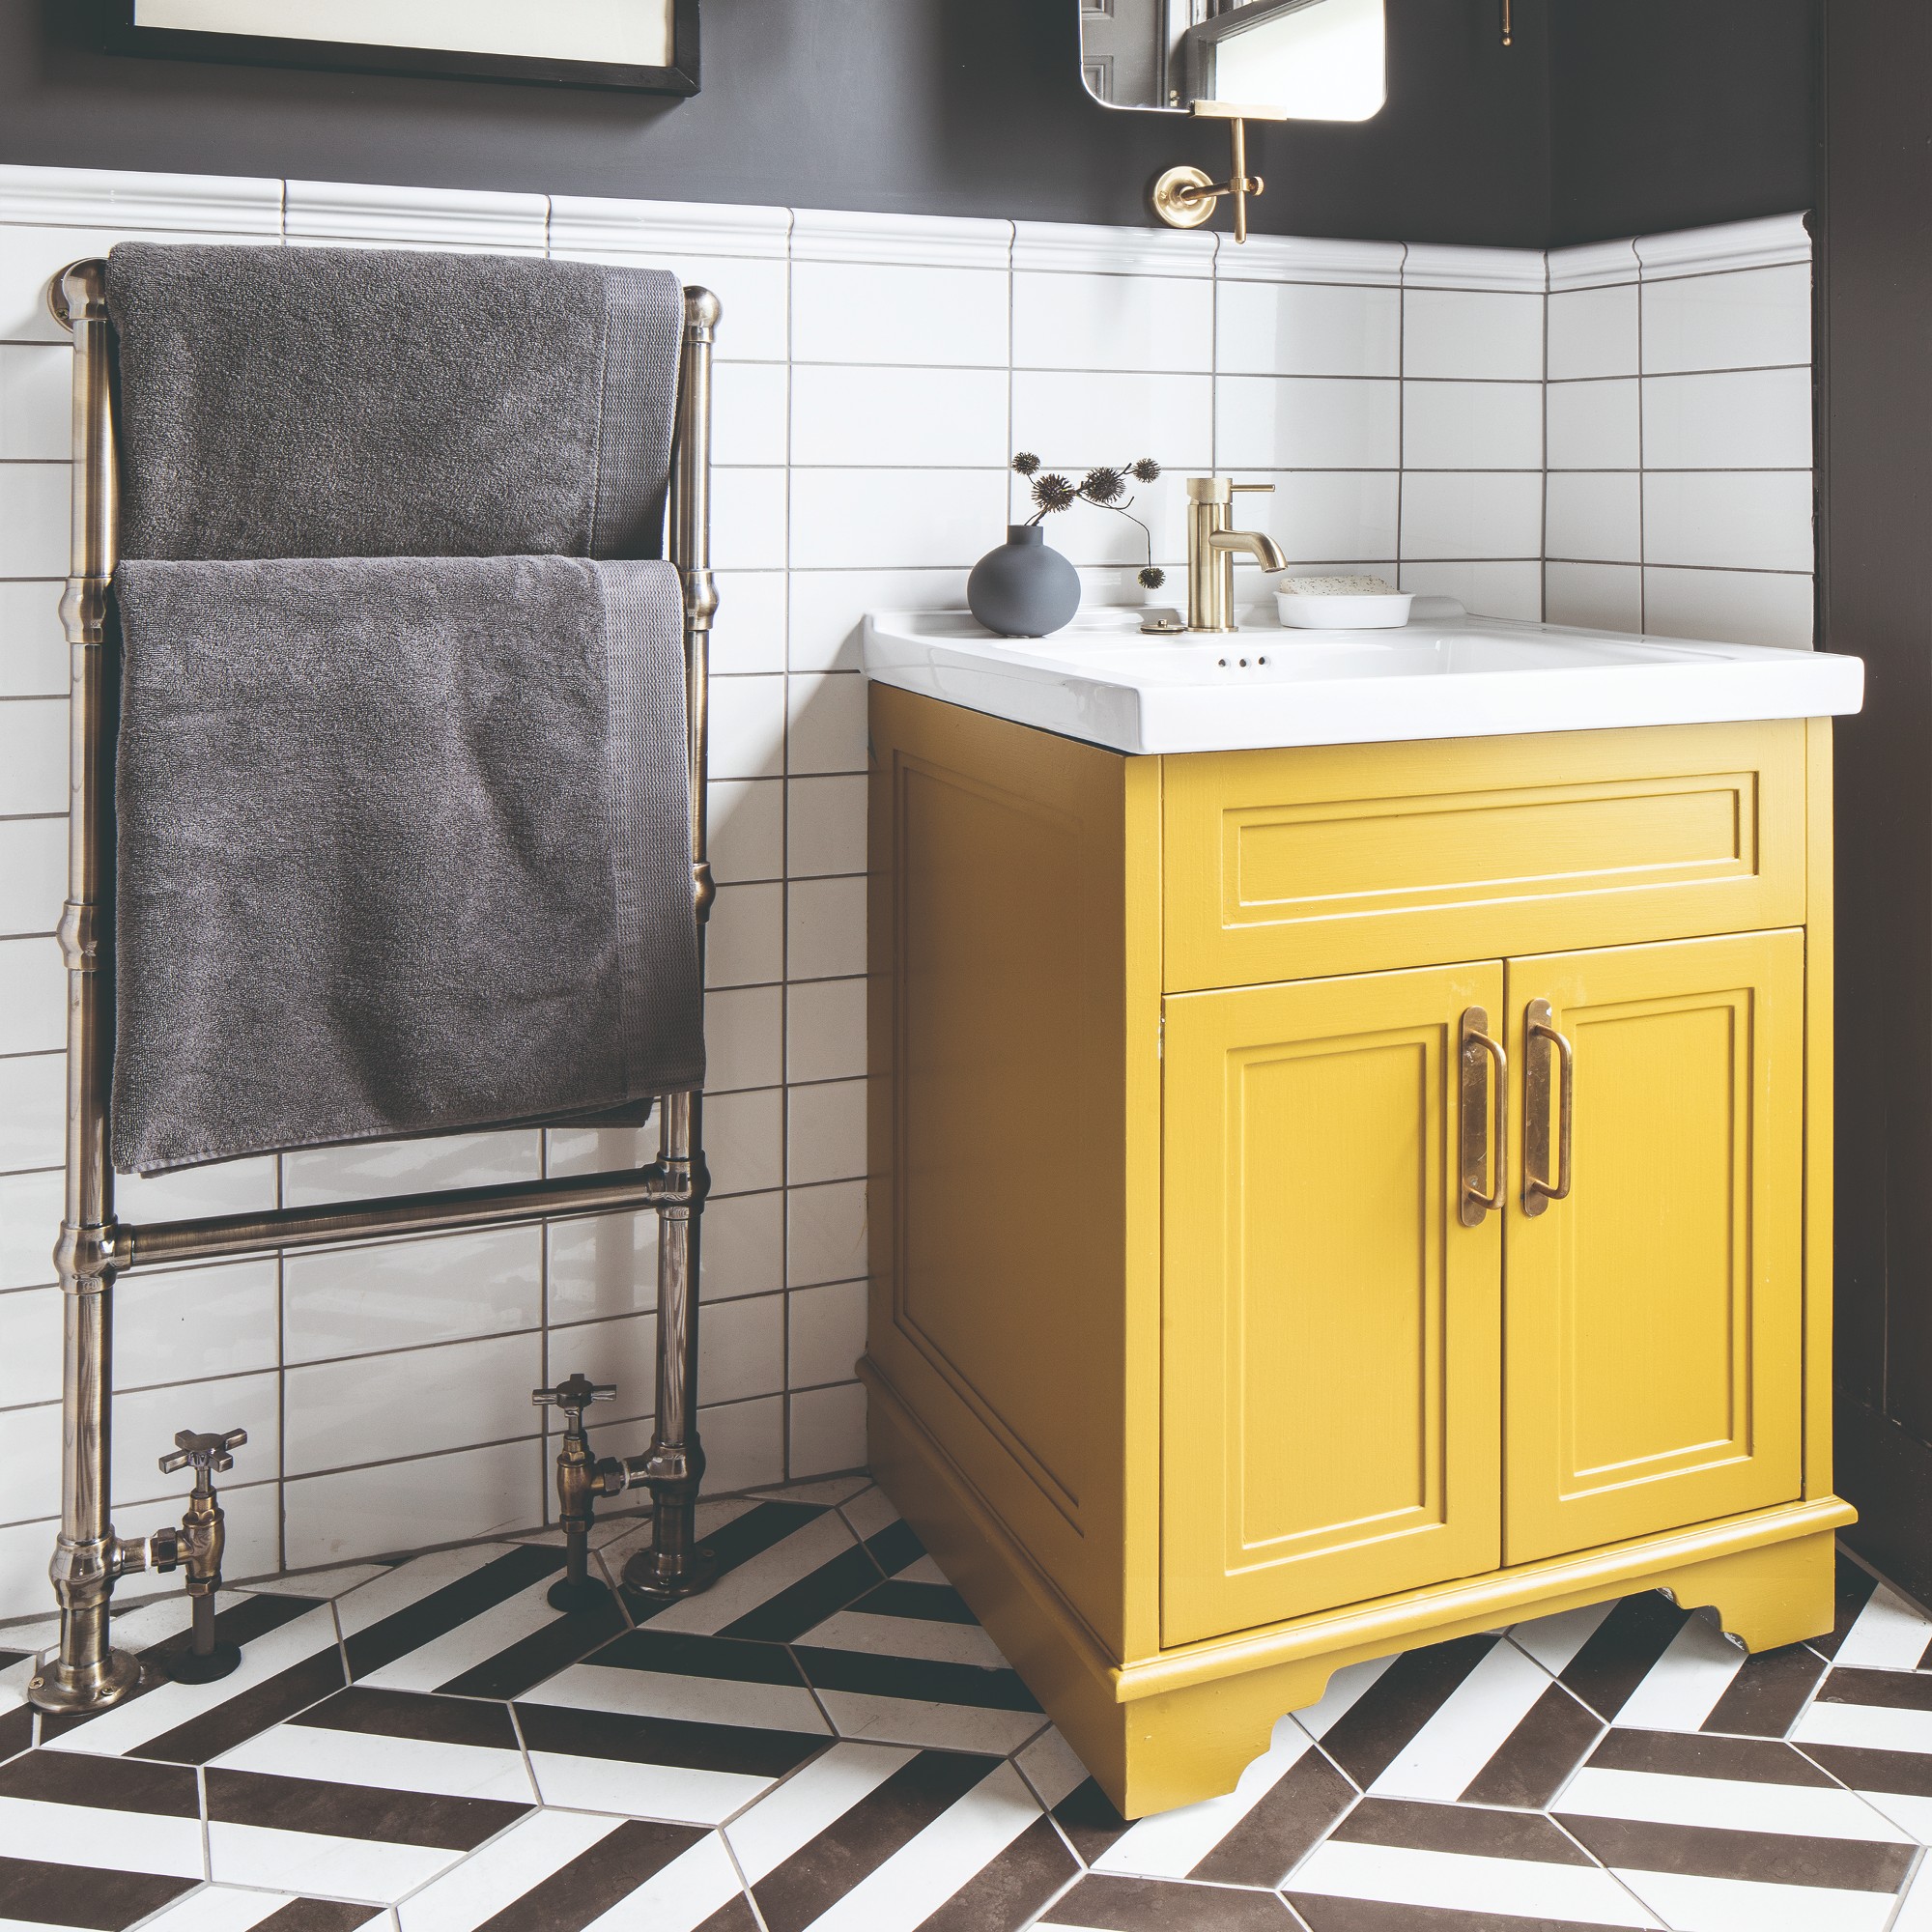 A tiled bathroom with a yellow sink cabinet